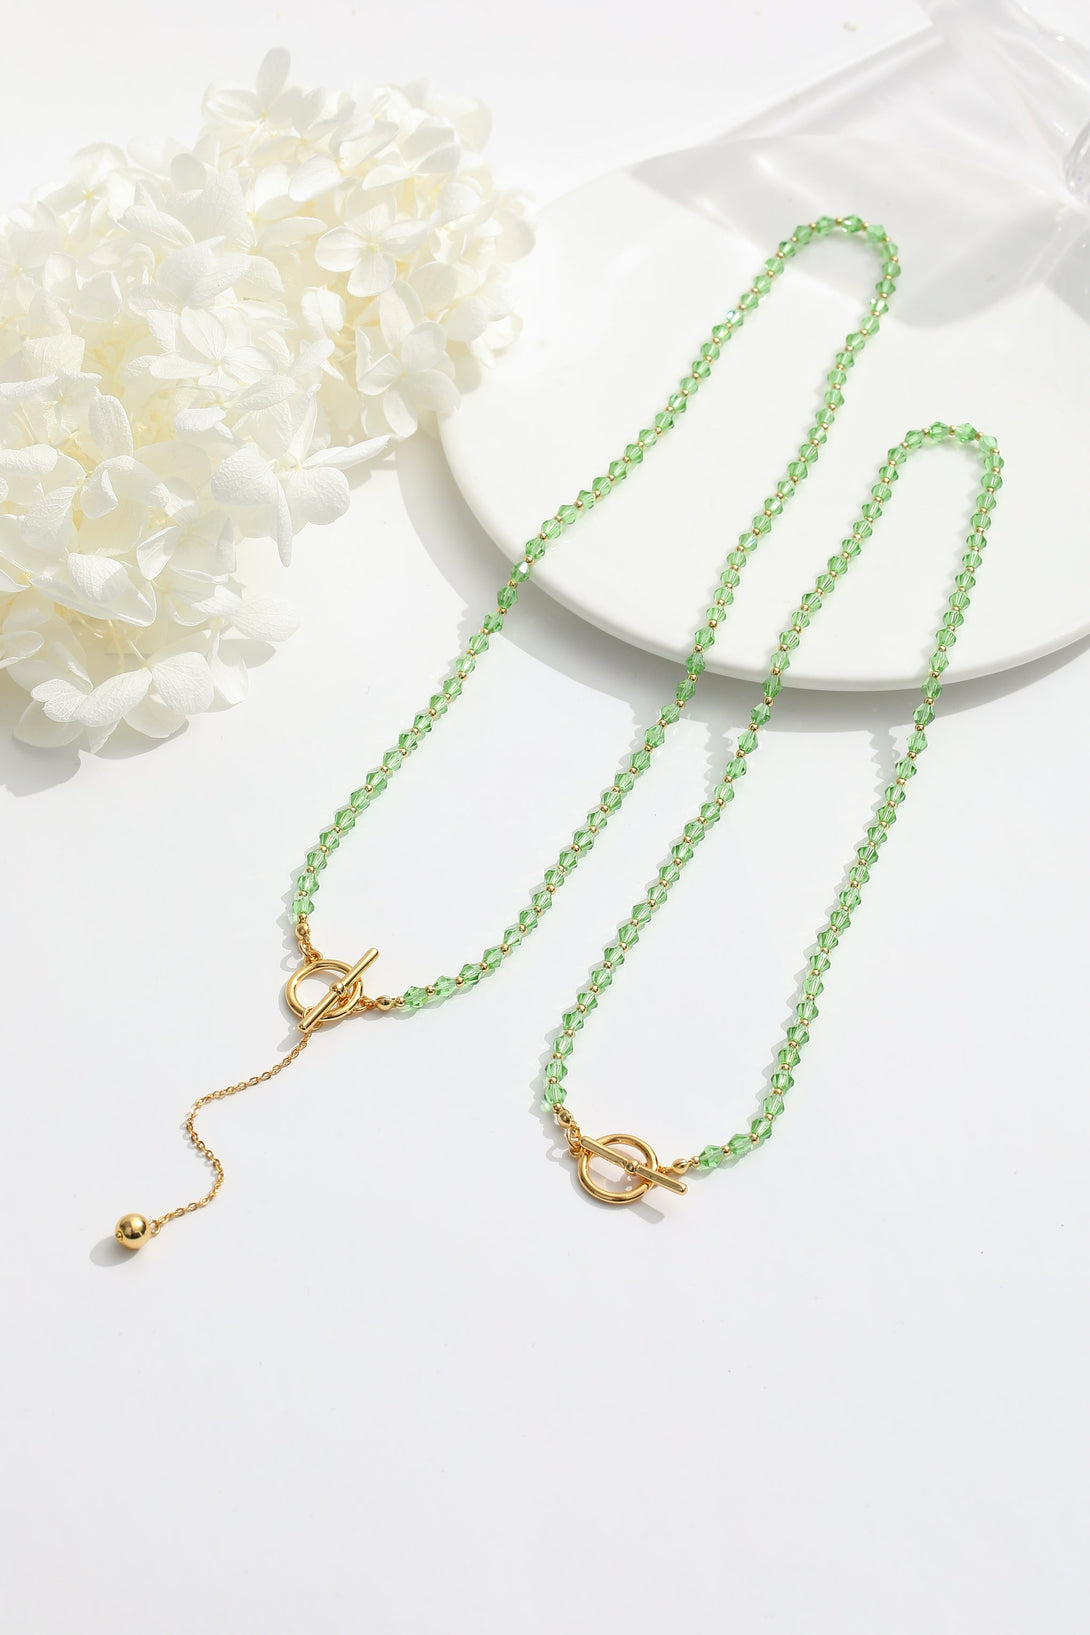 Green Crystal Beaded Necklace (Long) - Classicharms